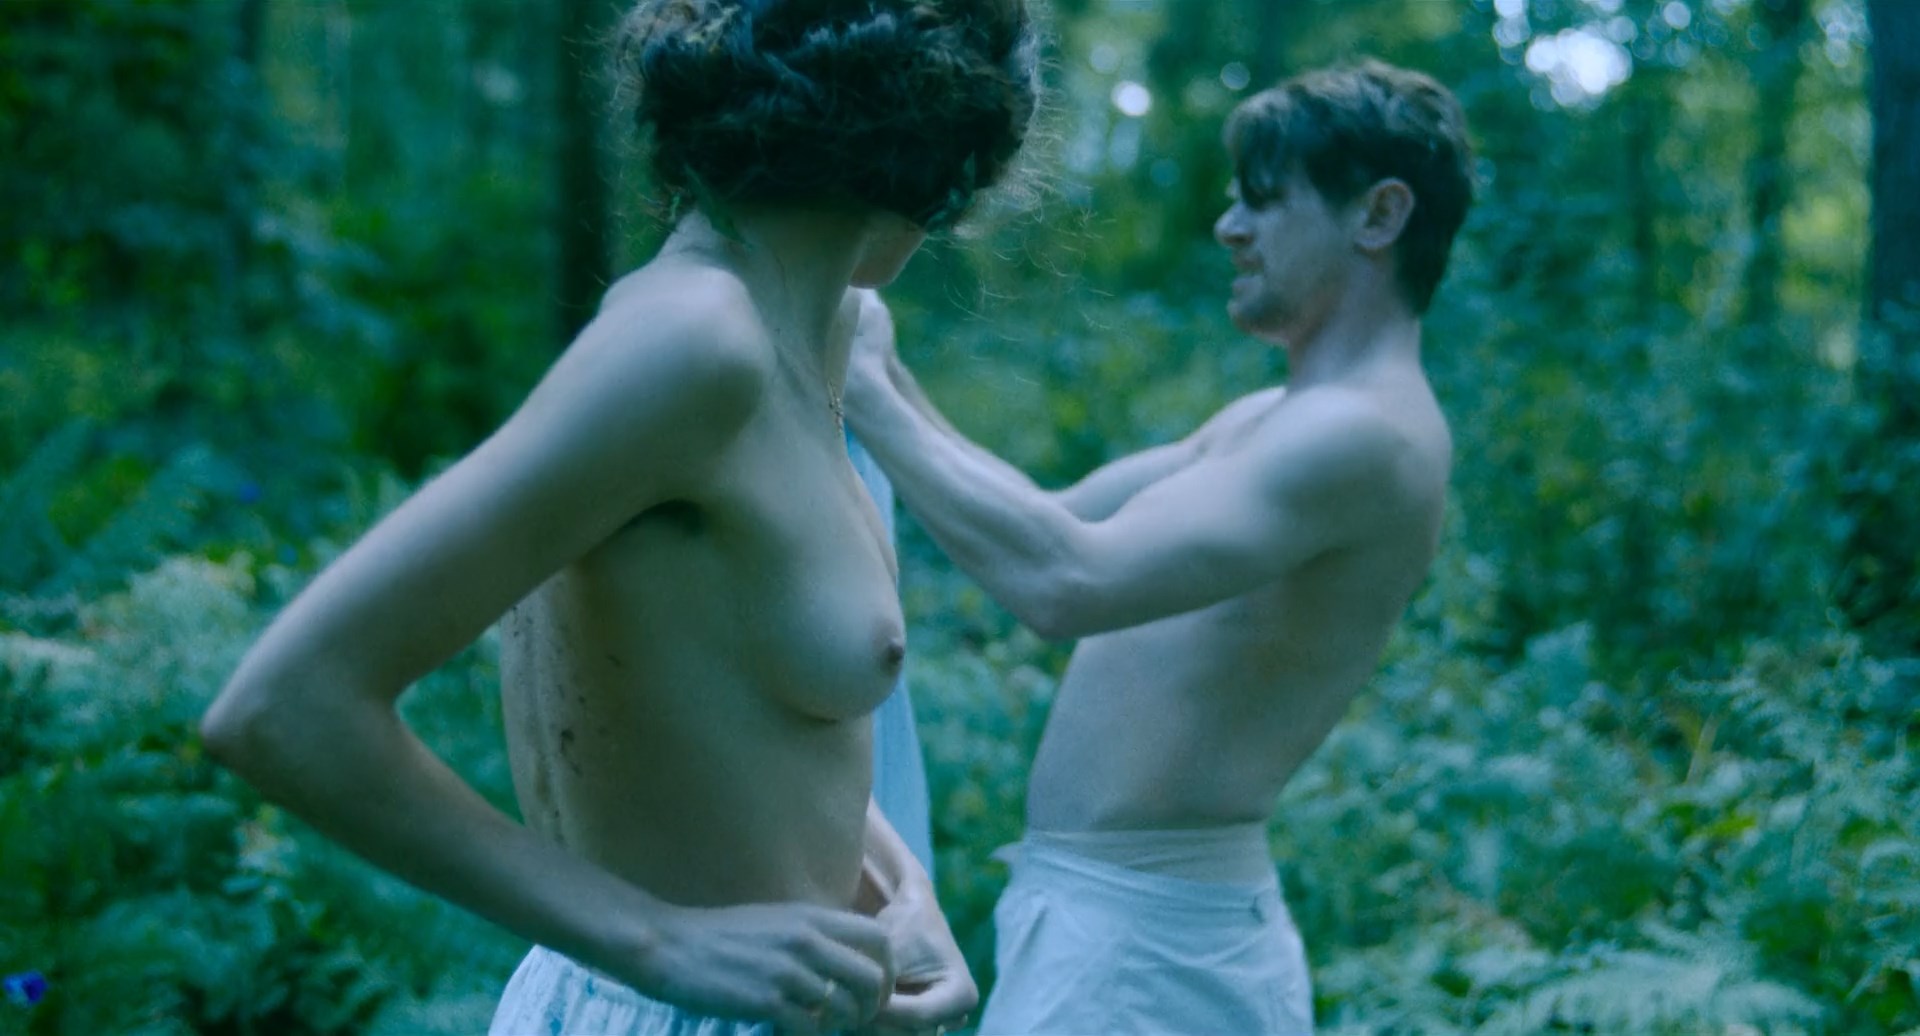 Lady chatterley lover nude scenes